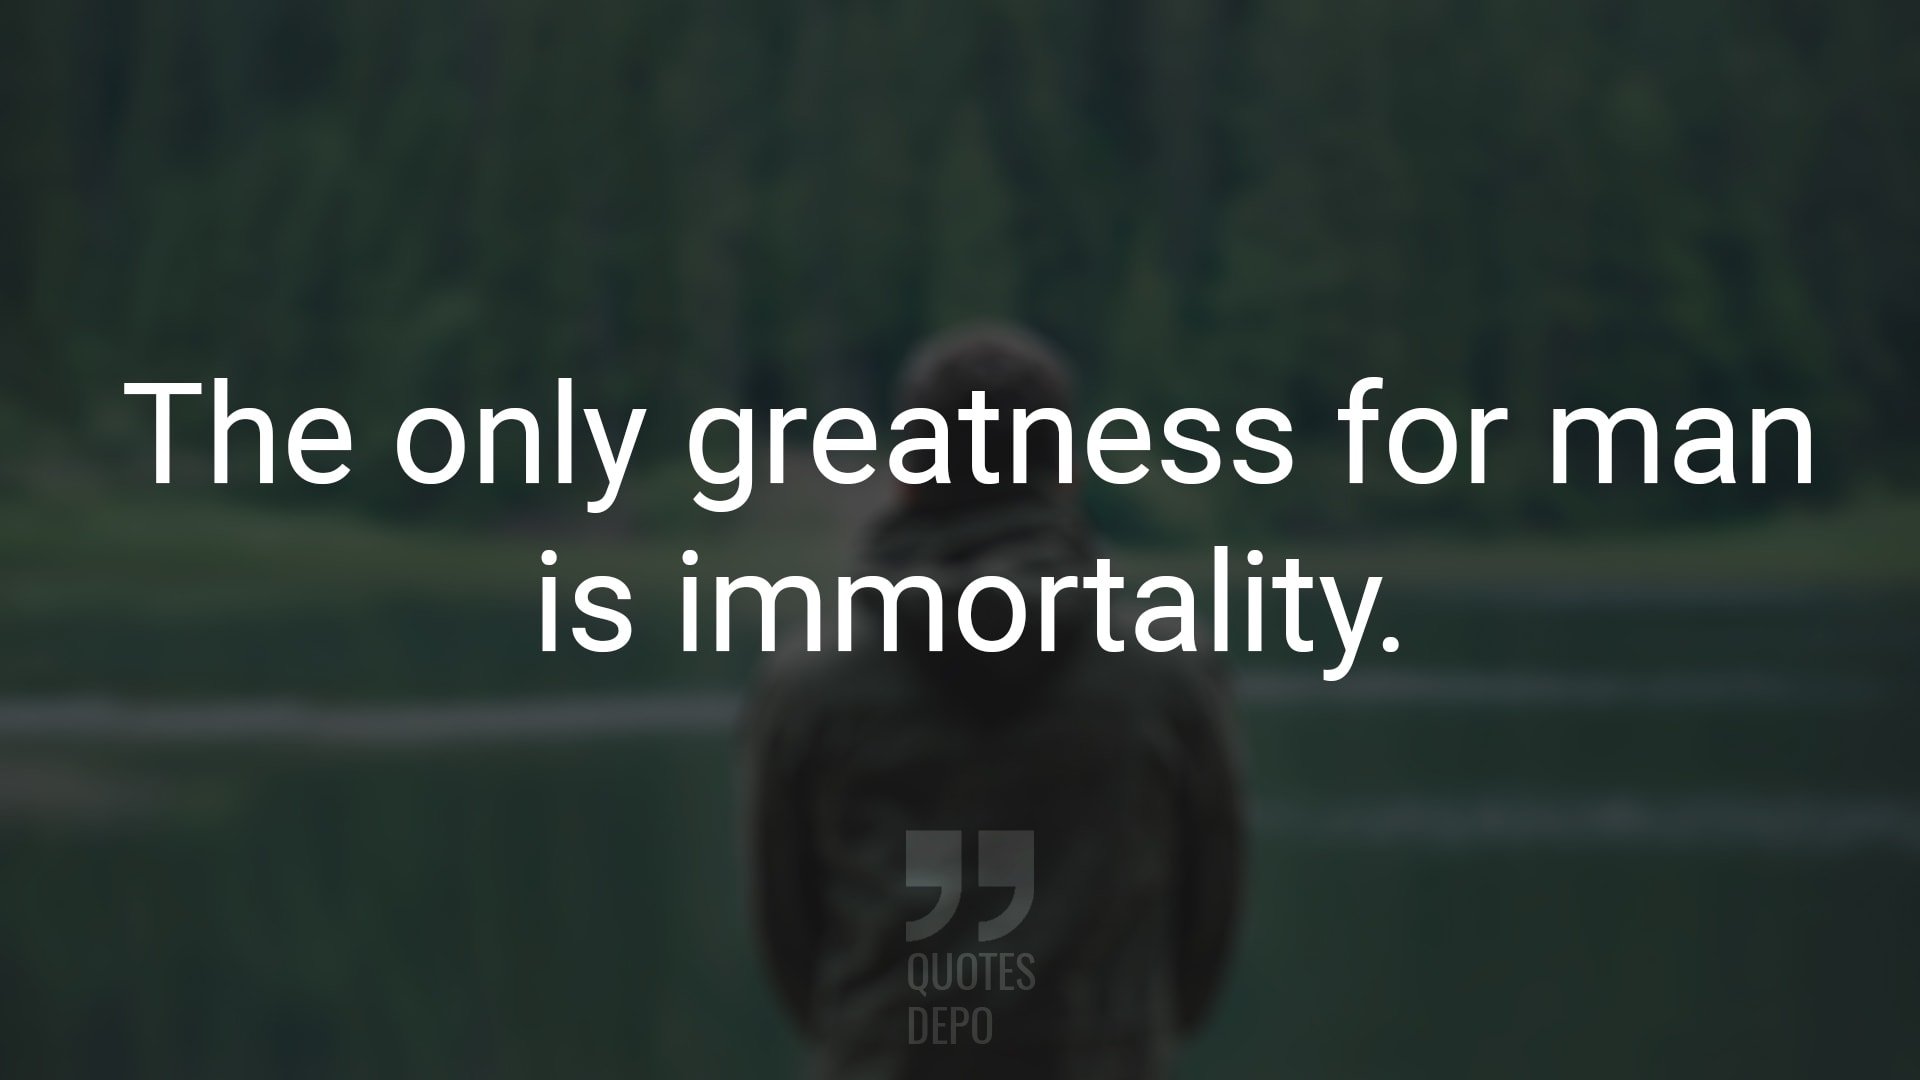 The Only Greatness for Man is Immortality